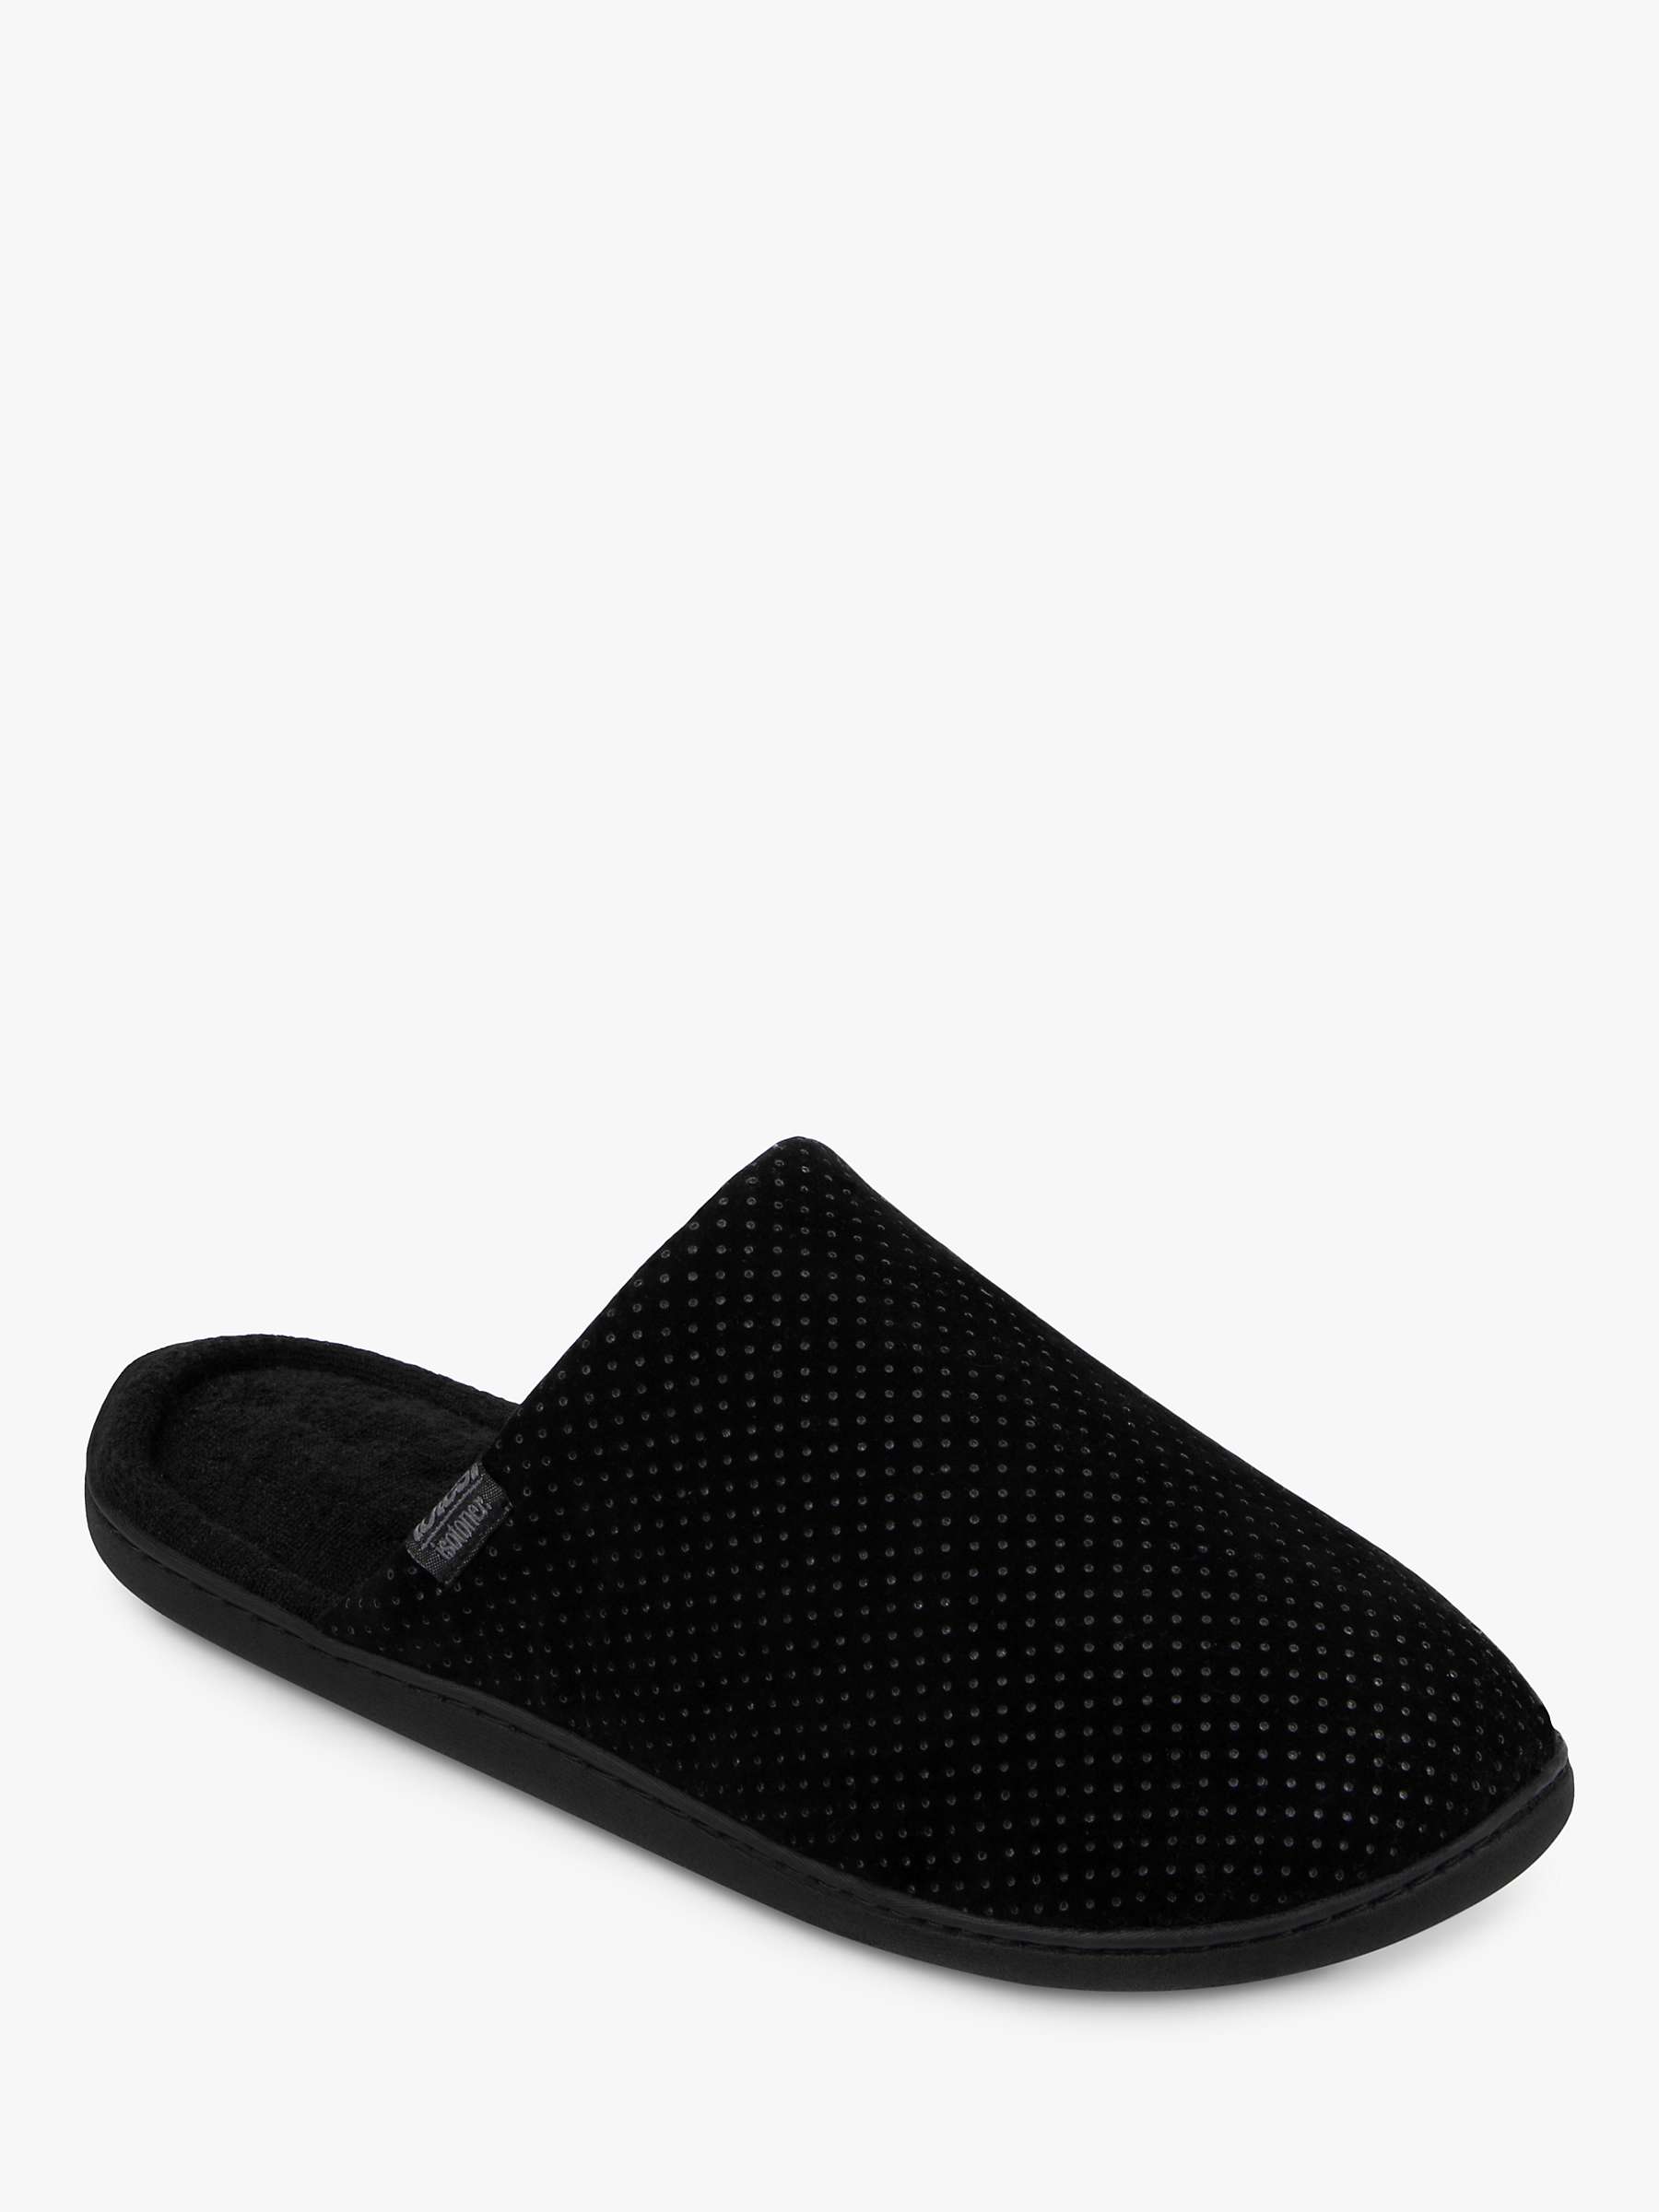 totes Airtex Suedette Mule Slippers, Black at John Lewis & Partners